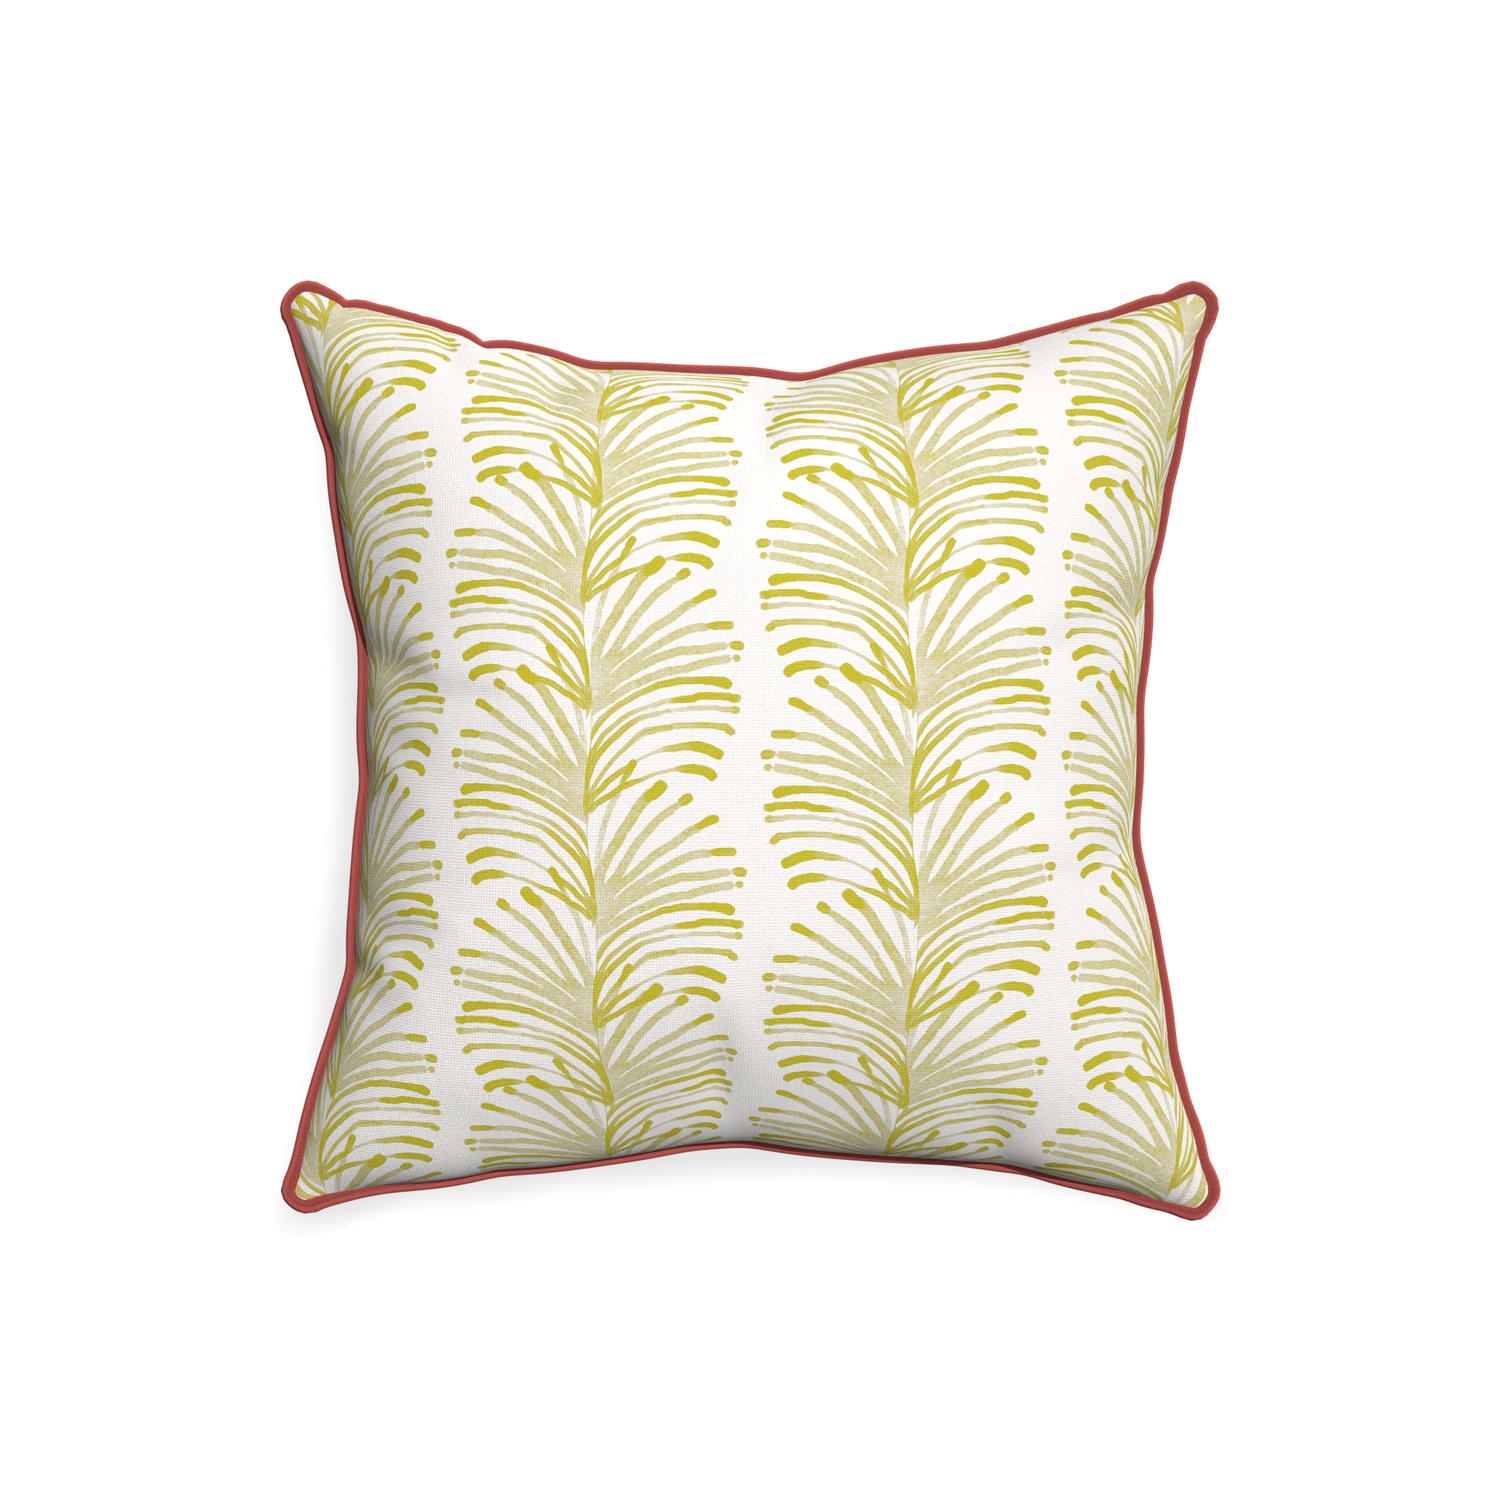 20-square emma chartreuse custom yellow stripe chartreusepillow with c piping on white background